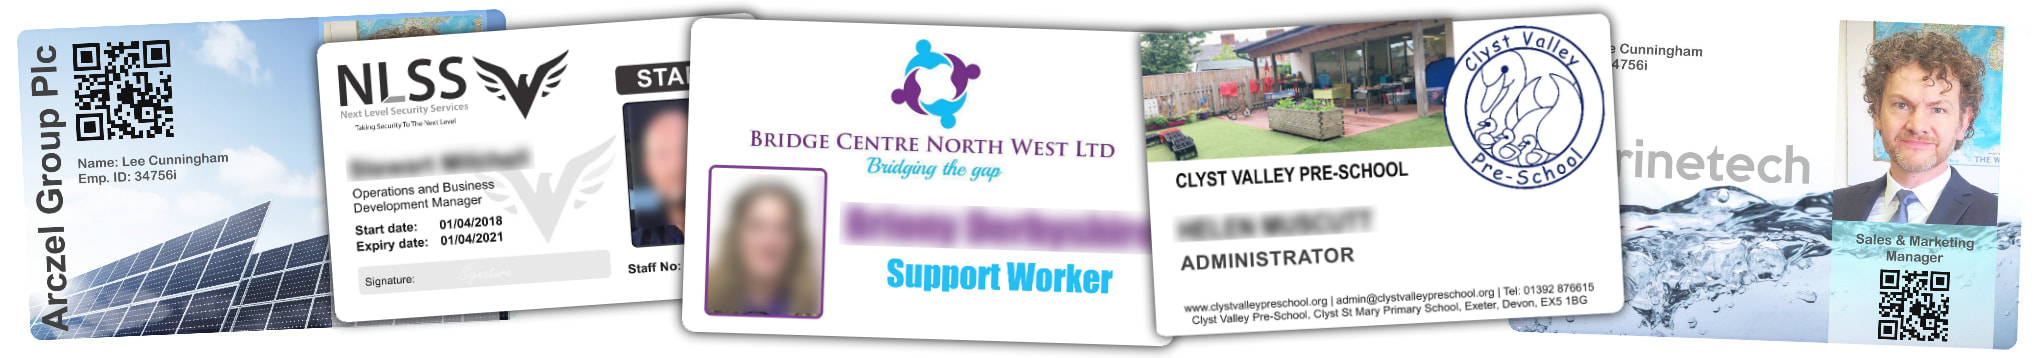 ID cards for health care workers in Chatteris, Godmanchester, Huntingdon, March, Ramsey, Soham,St Ives, St Neots, Whittlesey, Wisbech examples of health care workers staff photo ID cards | samples of employee Identity card printing | Workers ID cards printed in 